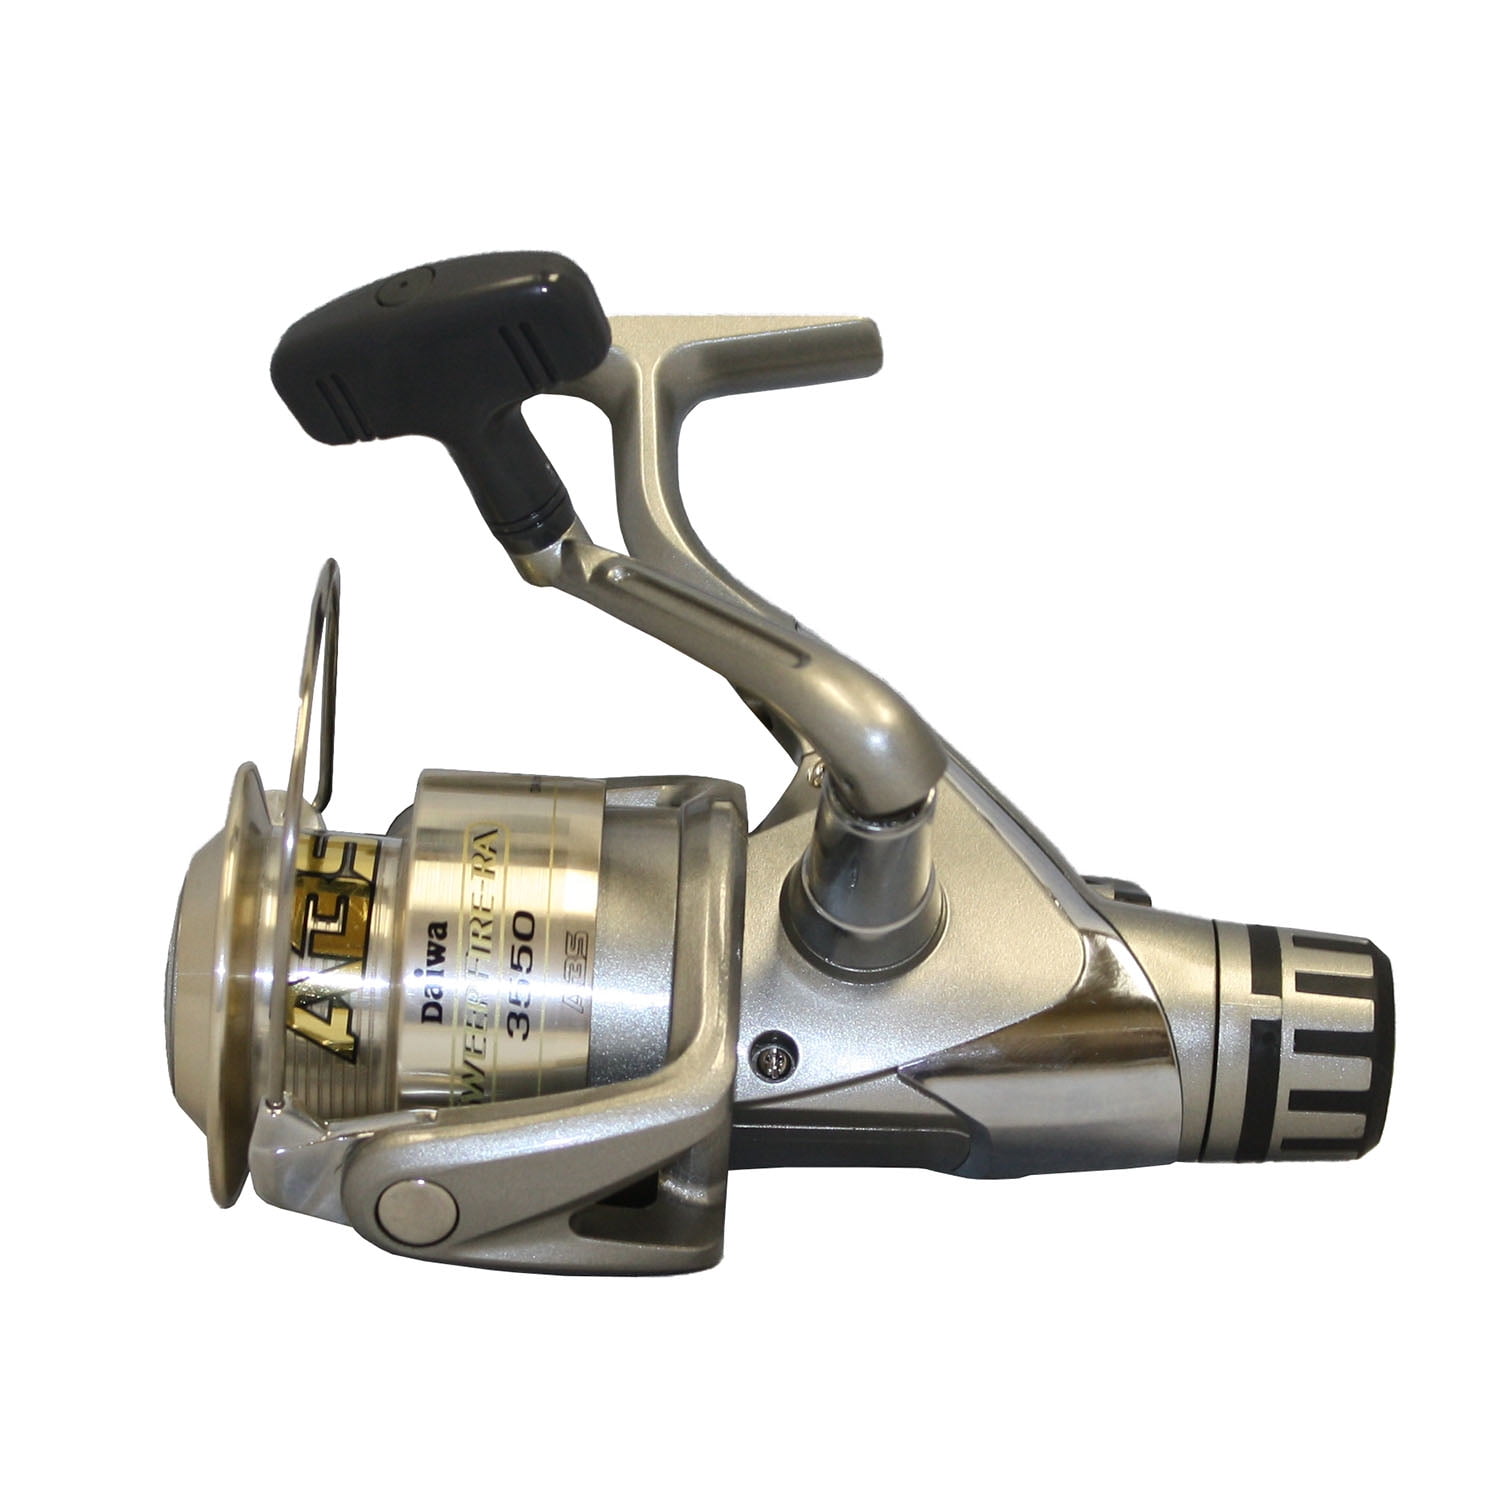 Daiwa Sweepfire RA 3550 Rear Drag Spinning Reel QTY-4 with 2 Spare Spools